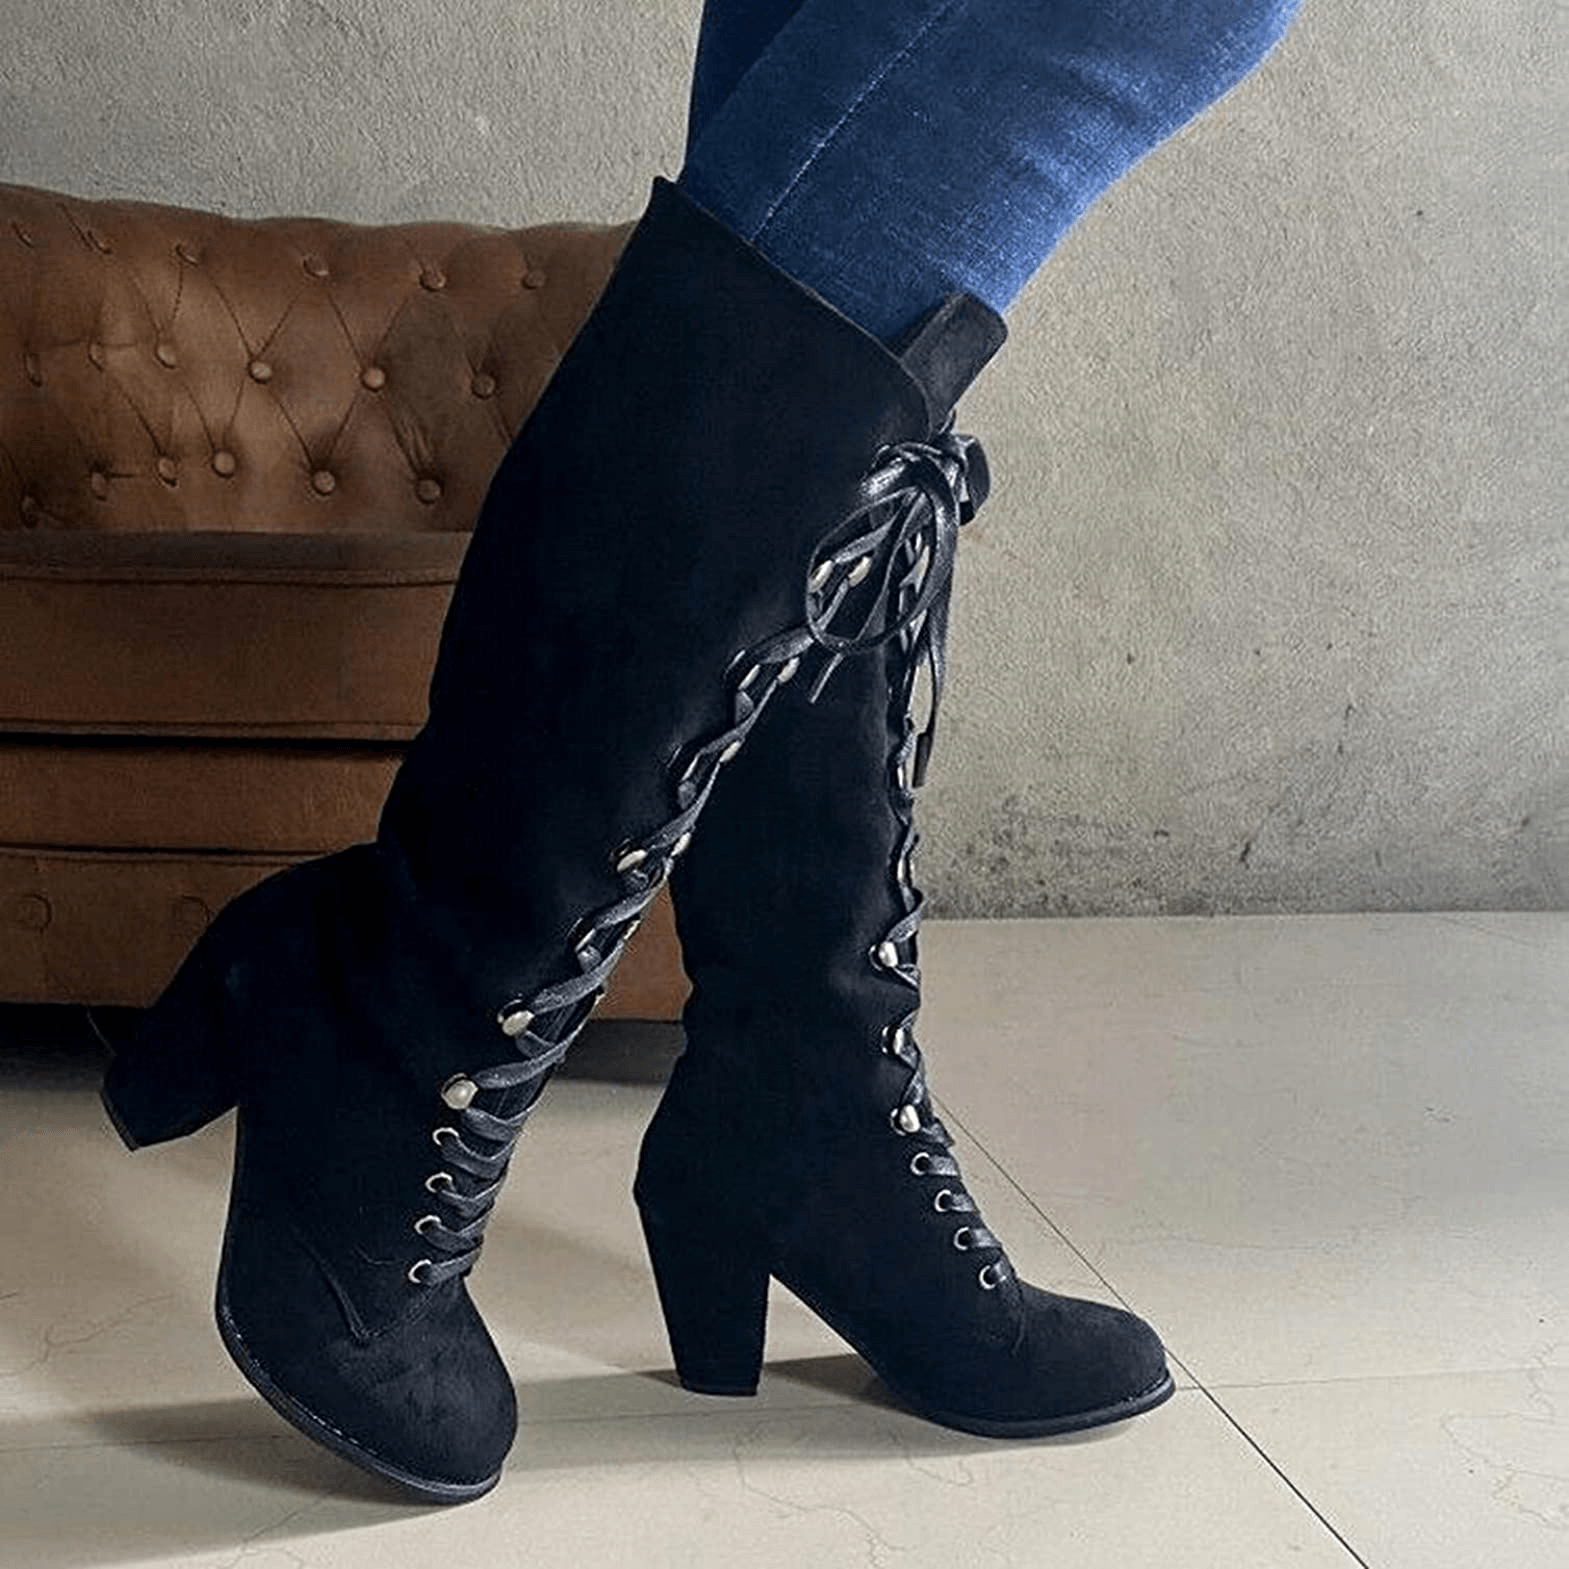 Front Lace-up Rider Boots, Coolest Leather High Neck Shoes For Women - Wonder Skull